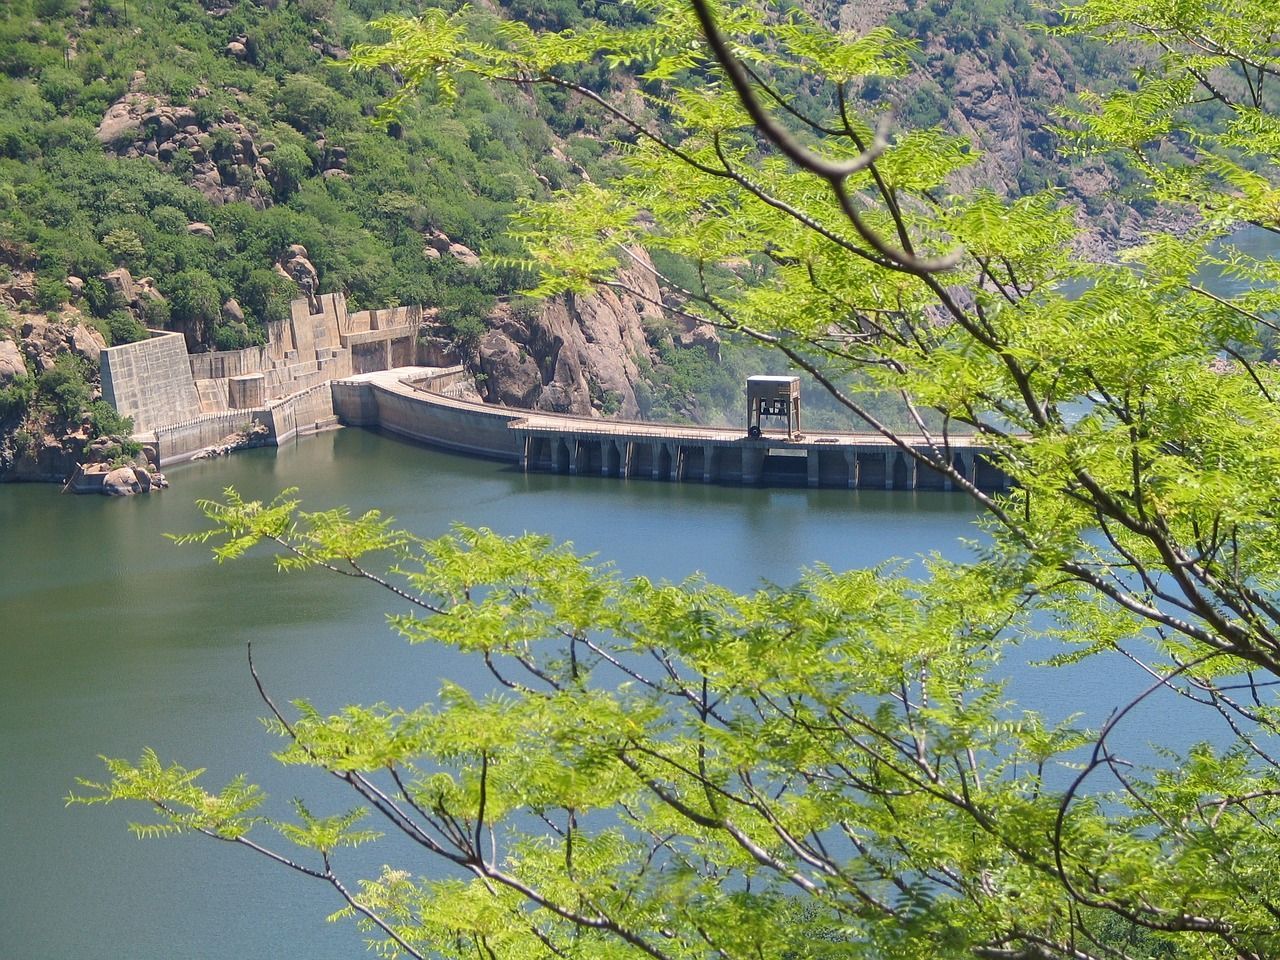 🌊 New sustainable hydropower can meet the world's energy needs